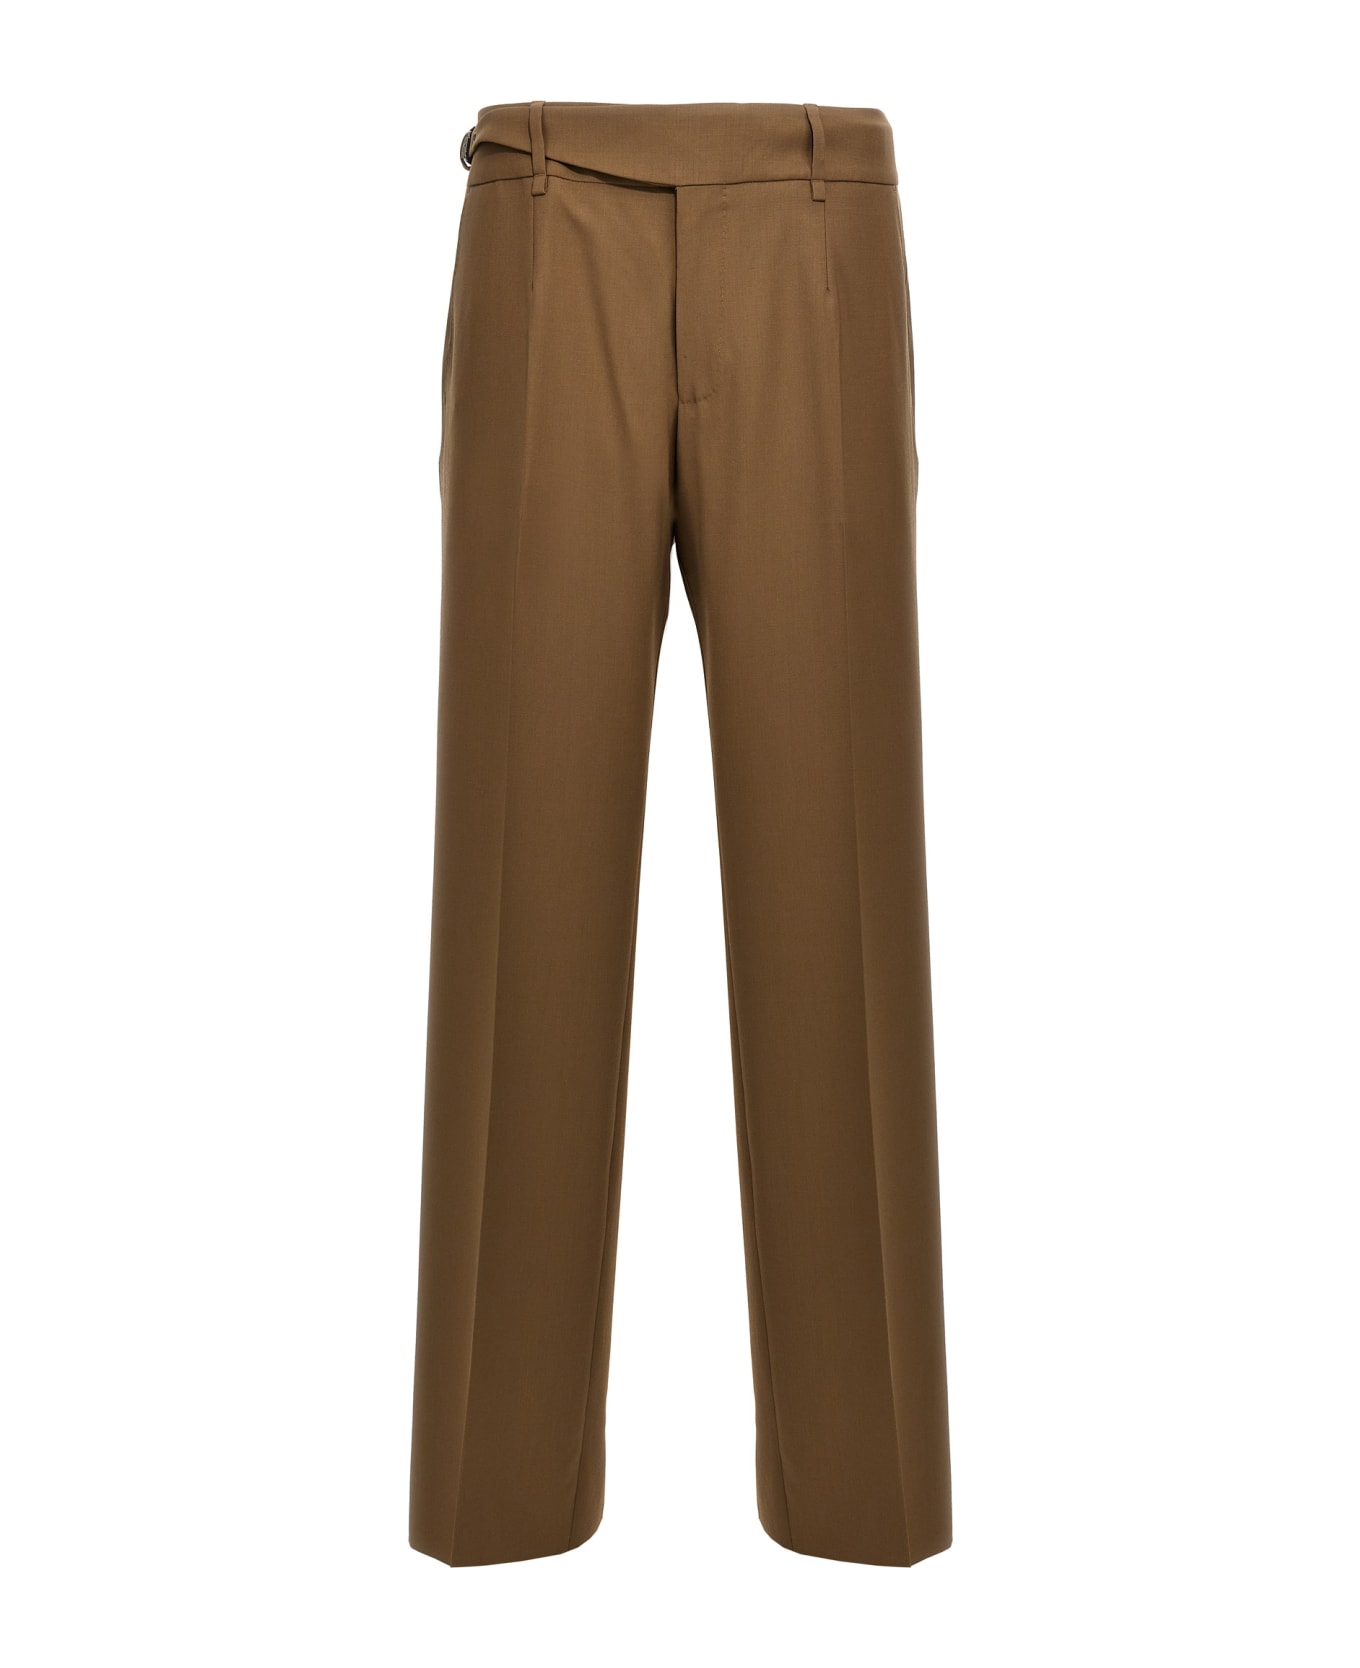 Dolce & Gabbana Tailored Trousers - Beige ボトムス